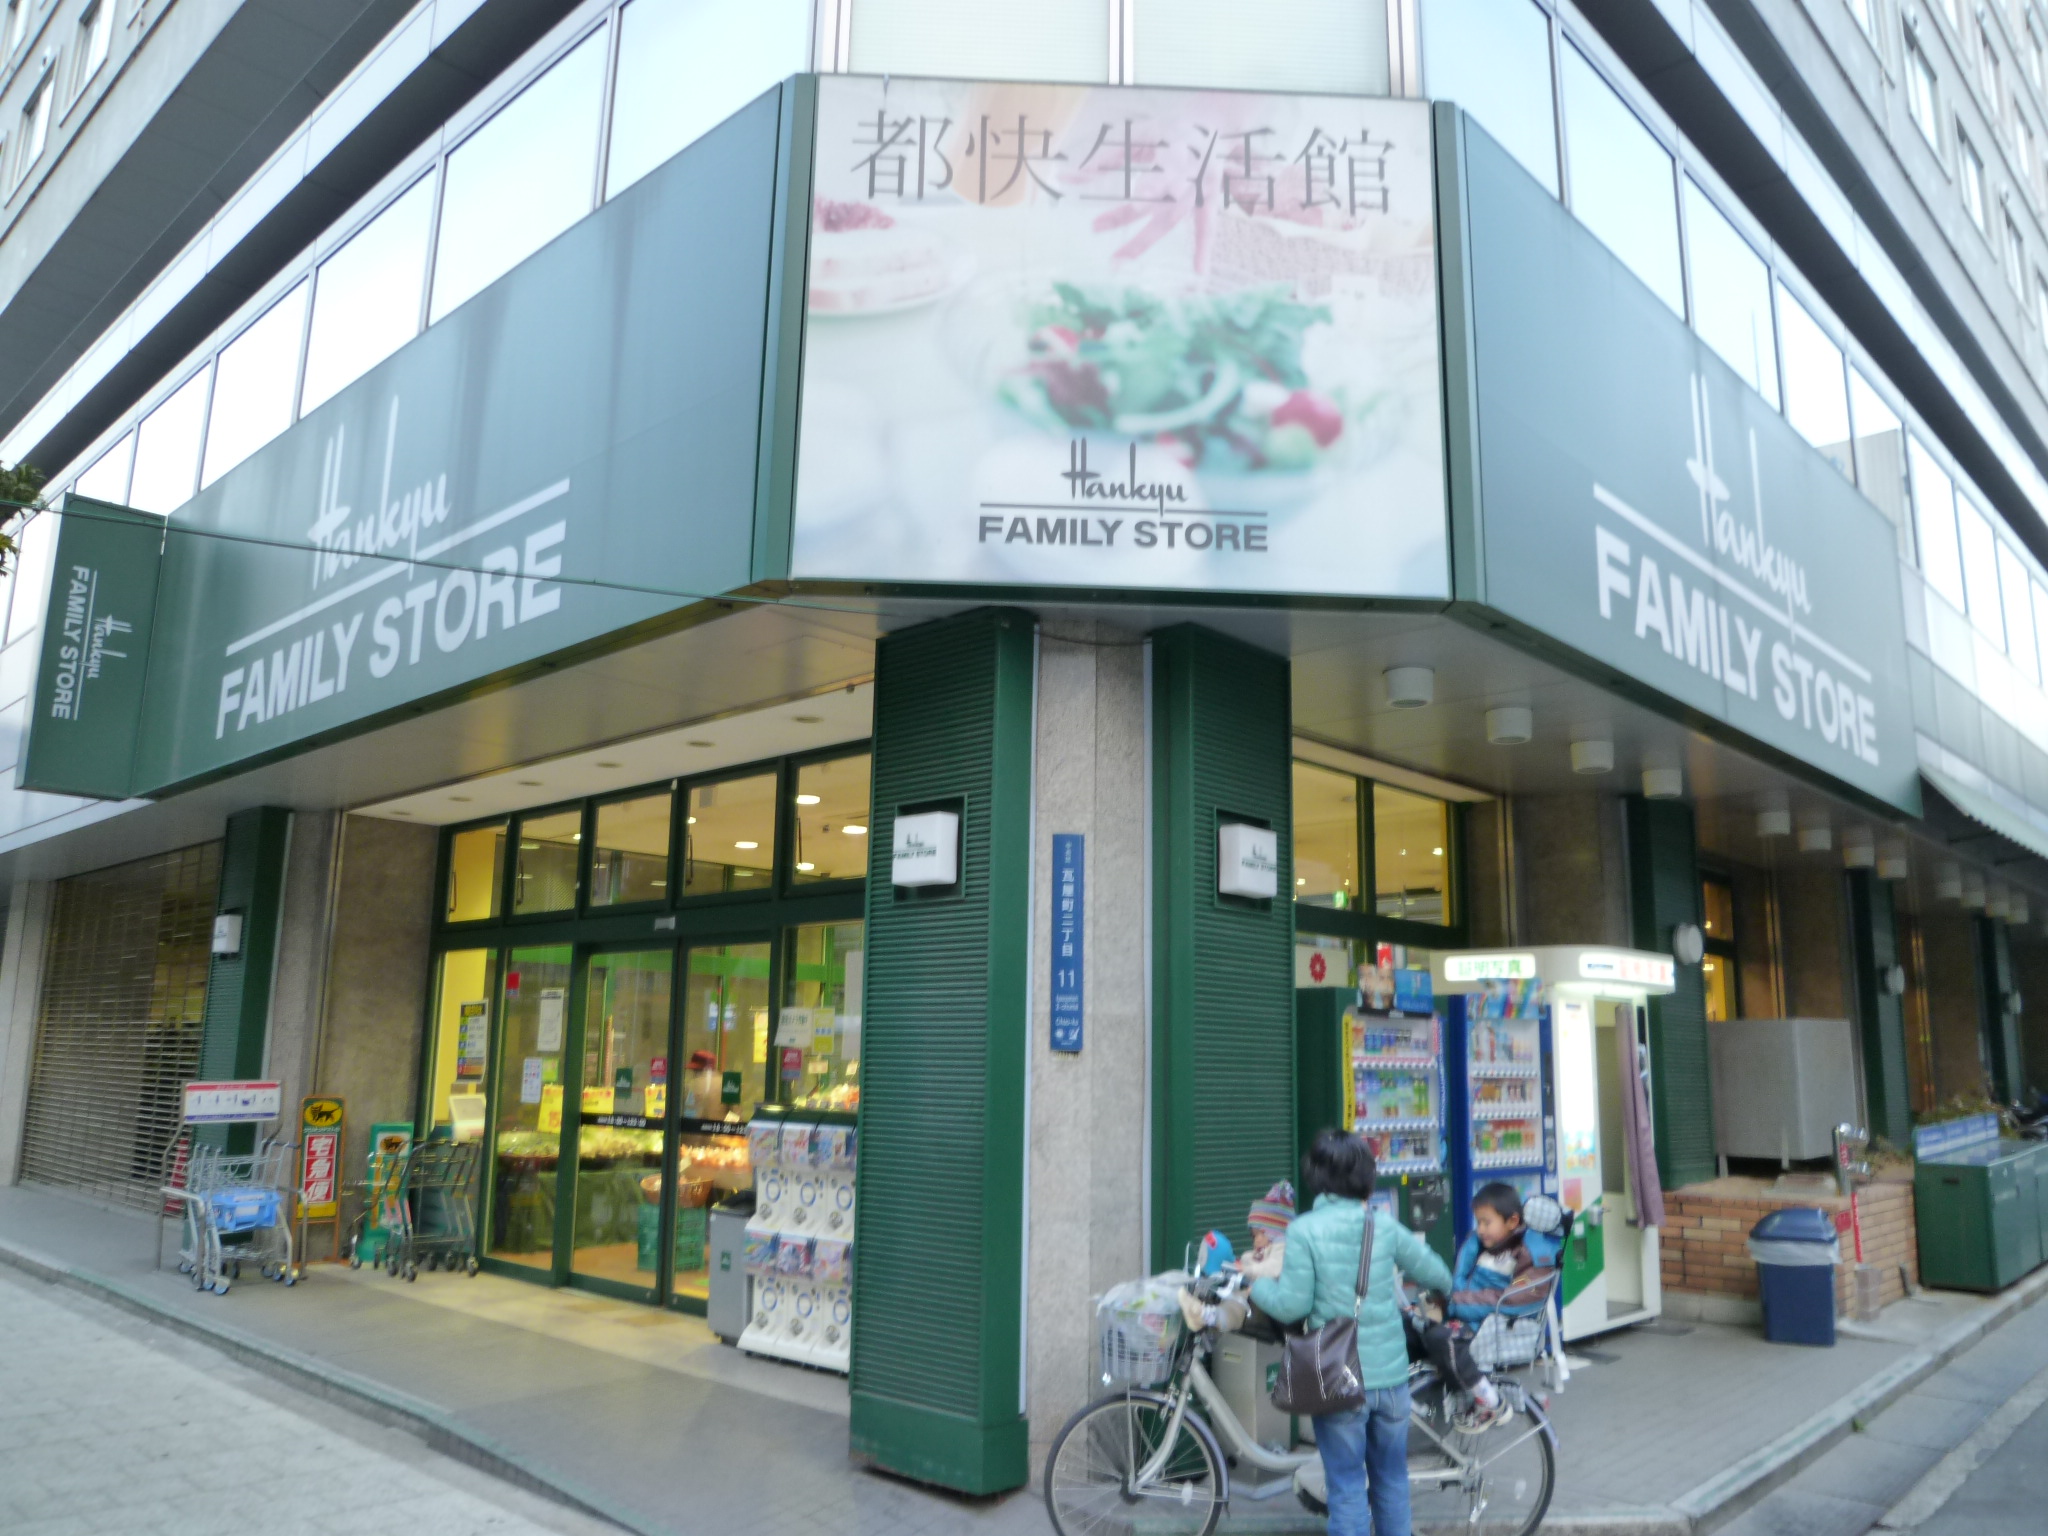 Supermarket. 606m to Hankyu family store tile store the town store (Super)